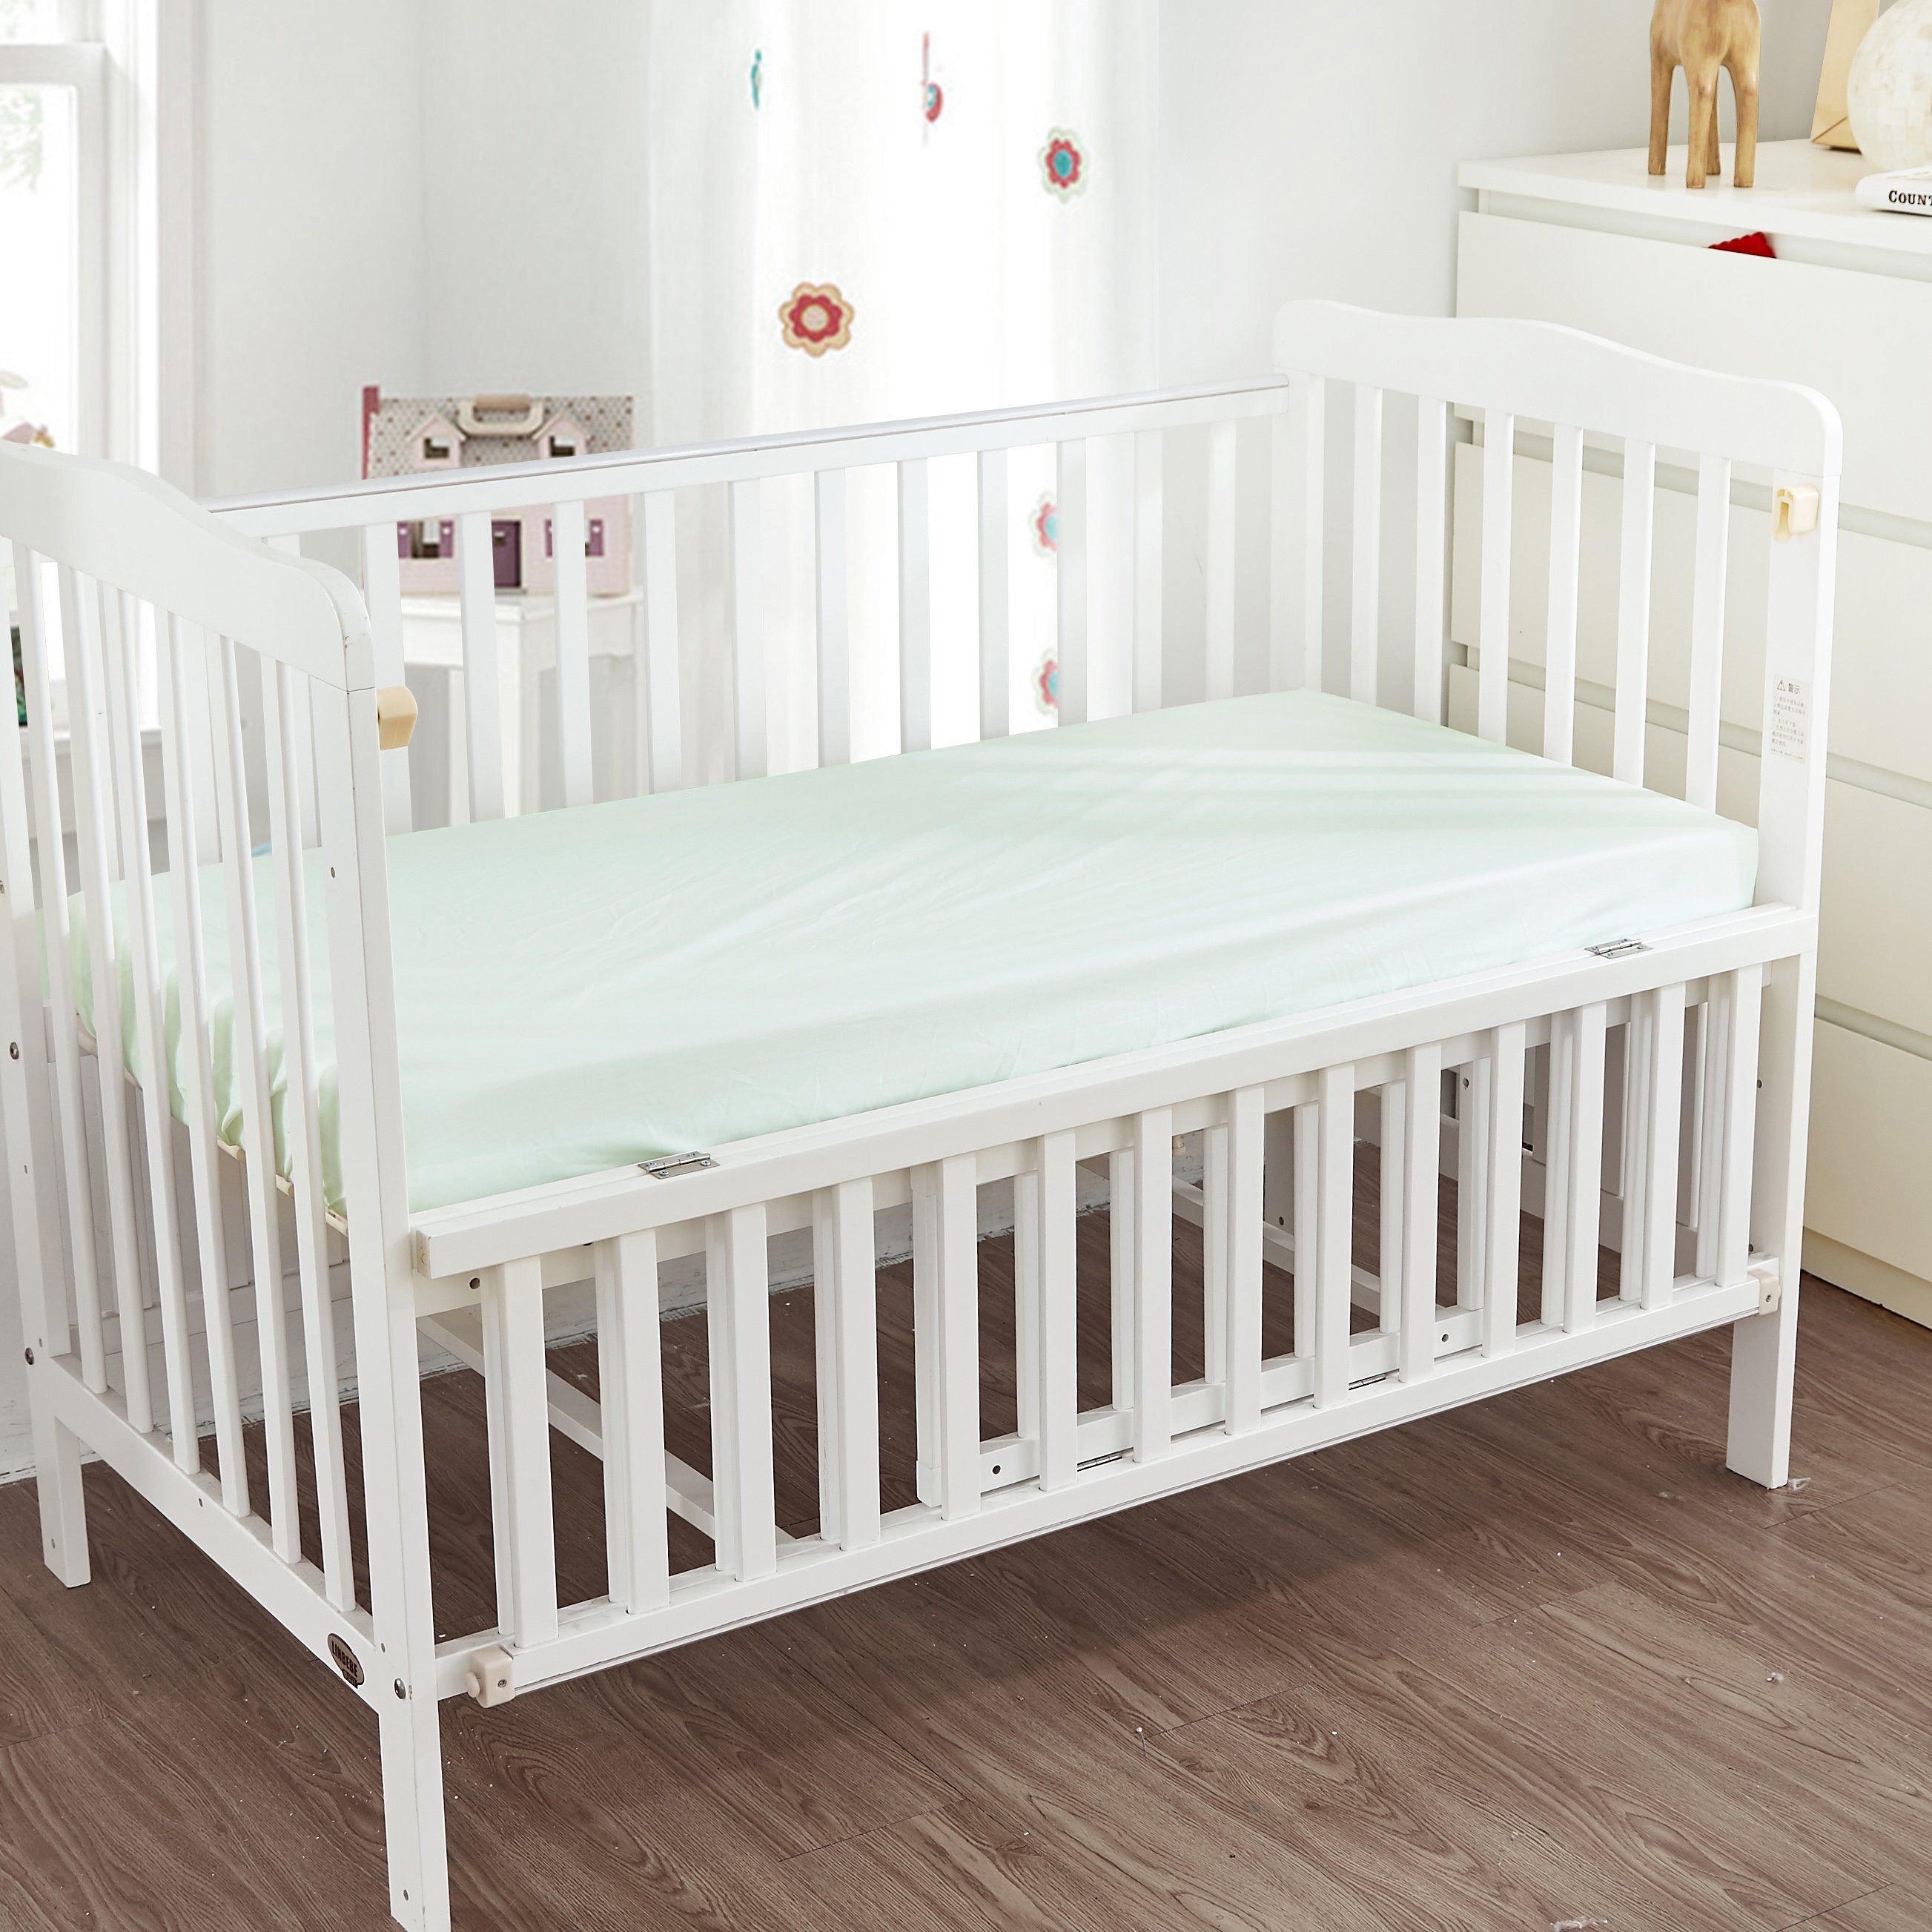 Baby Crib Fitted Saftey® Sheets Crib Sheet Bargoose Home Textiles, Inc. 22" x 44" x 3" Mint 